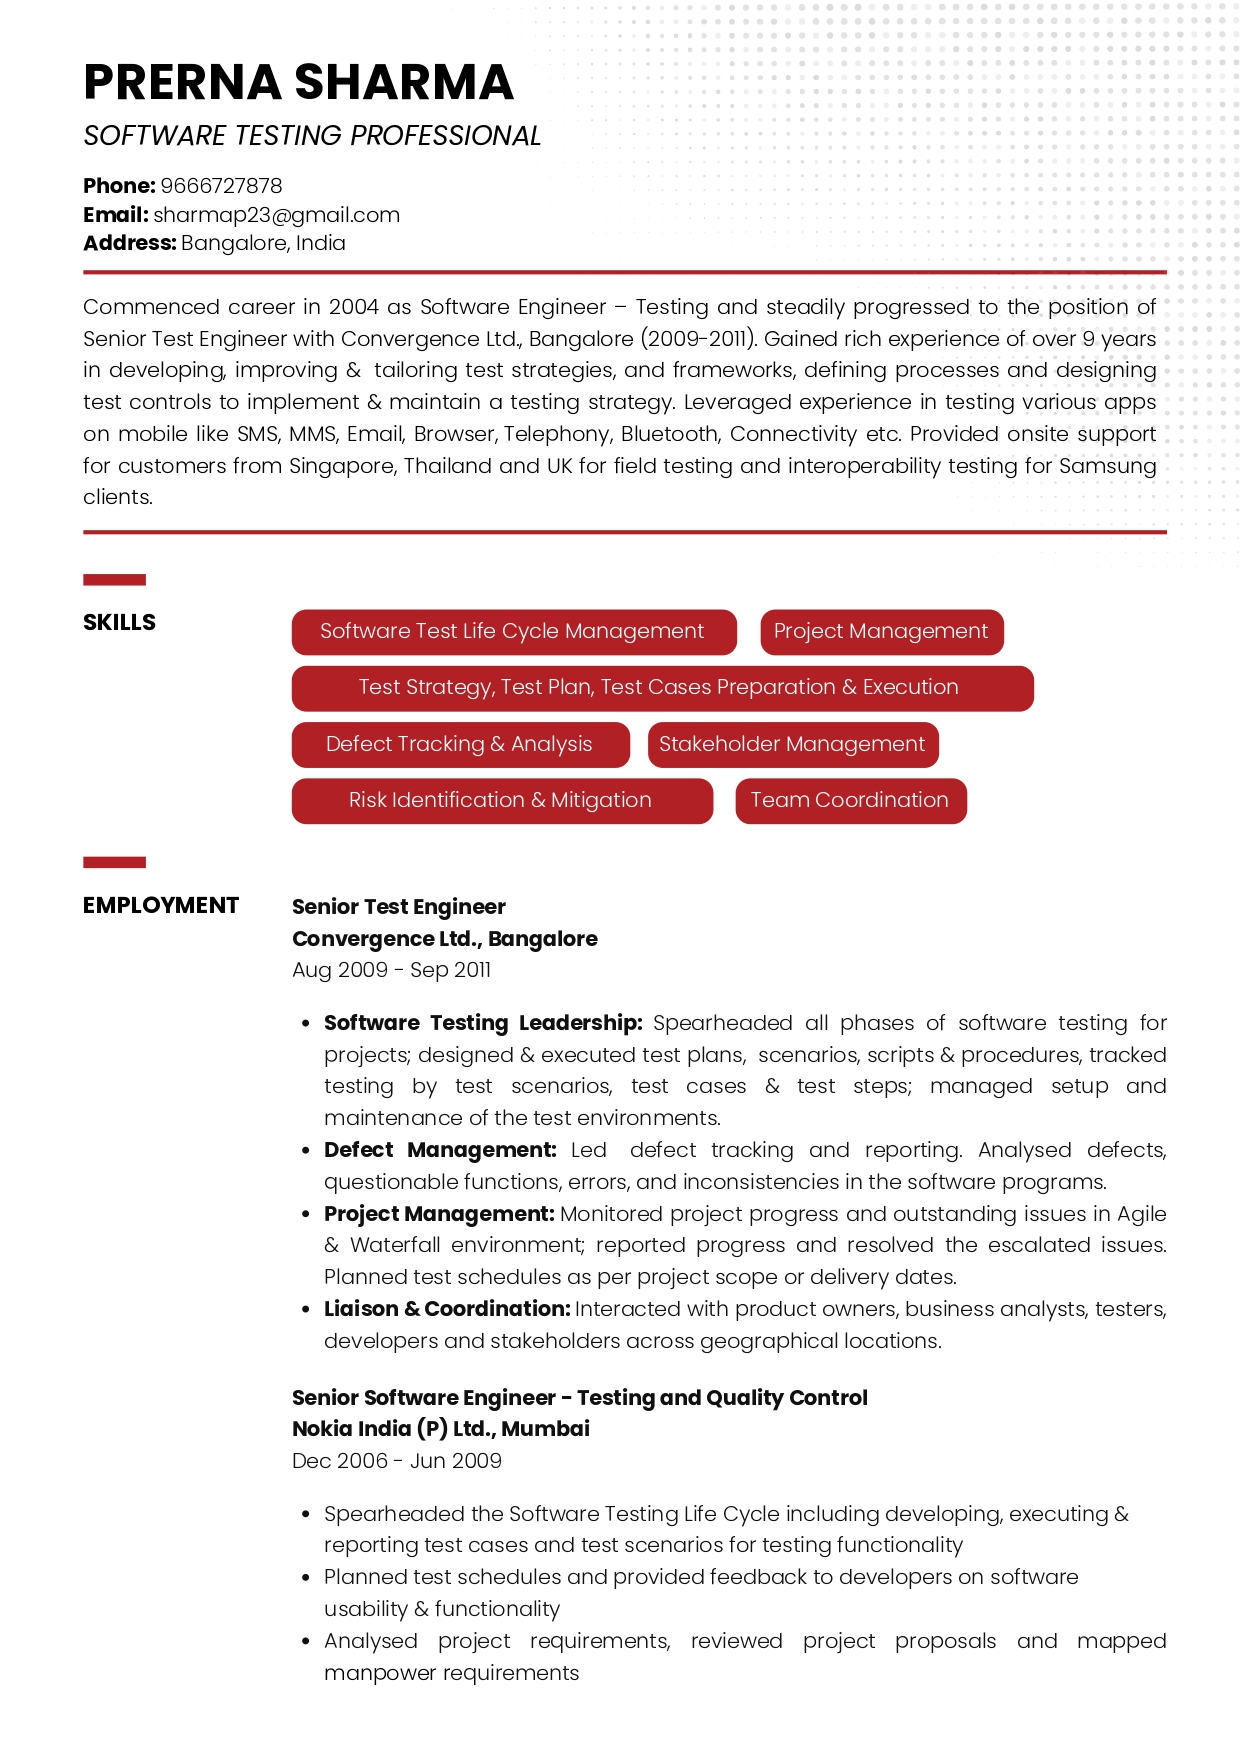 Resume of Software Testing Professional with Career Break